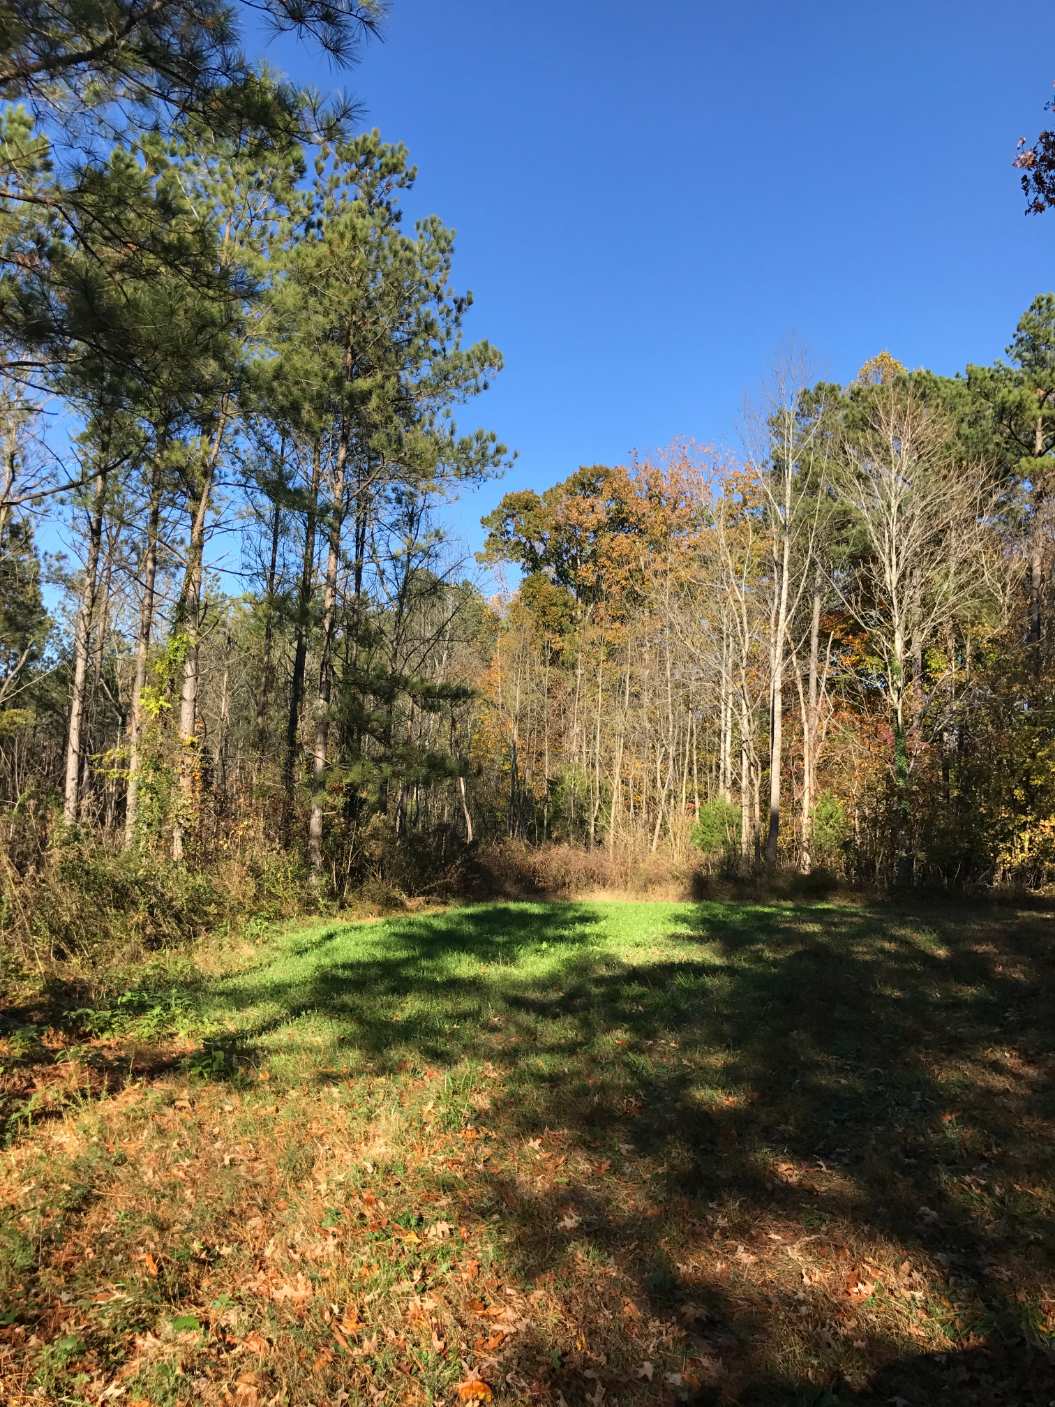 Advance Land and Timber Land for sale property_imgs/bk332717.jpg